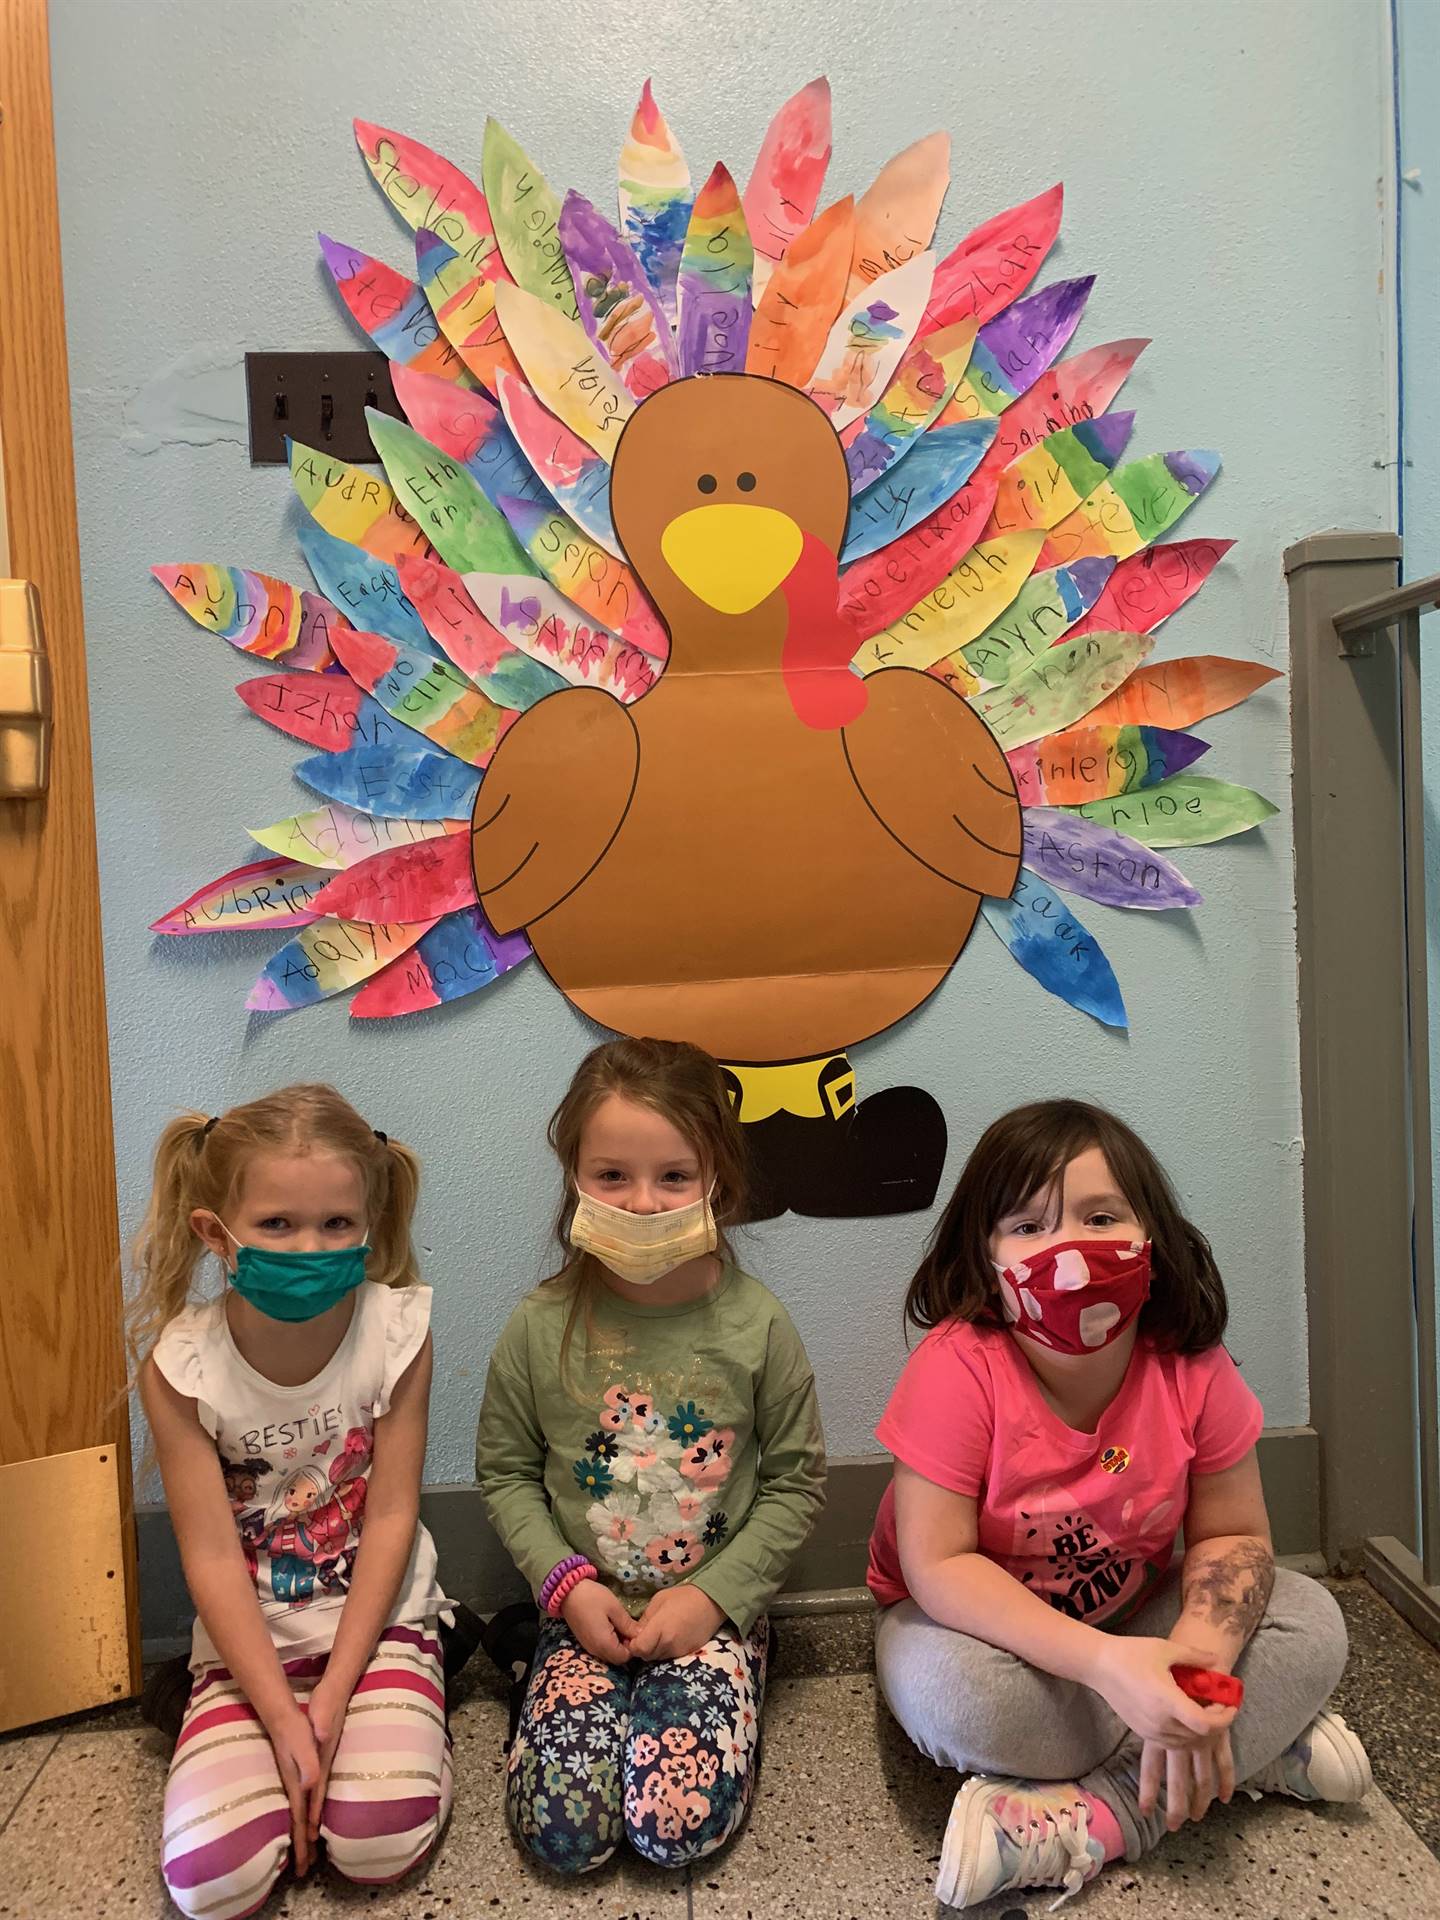 3 students sitting in front of giant paper turkey with multicolored feathers.